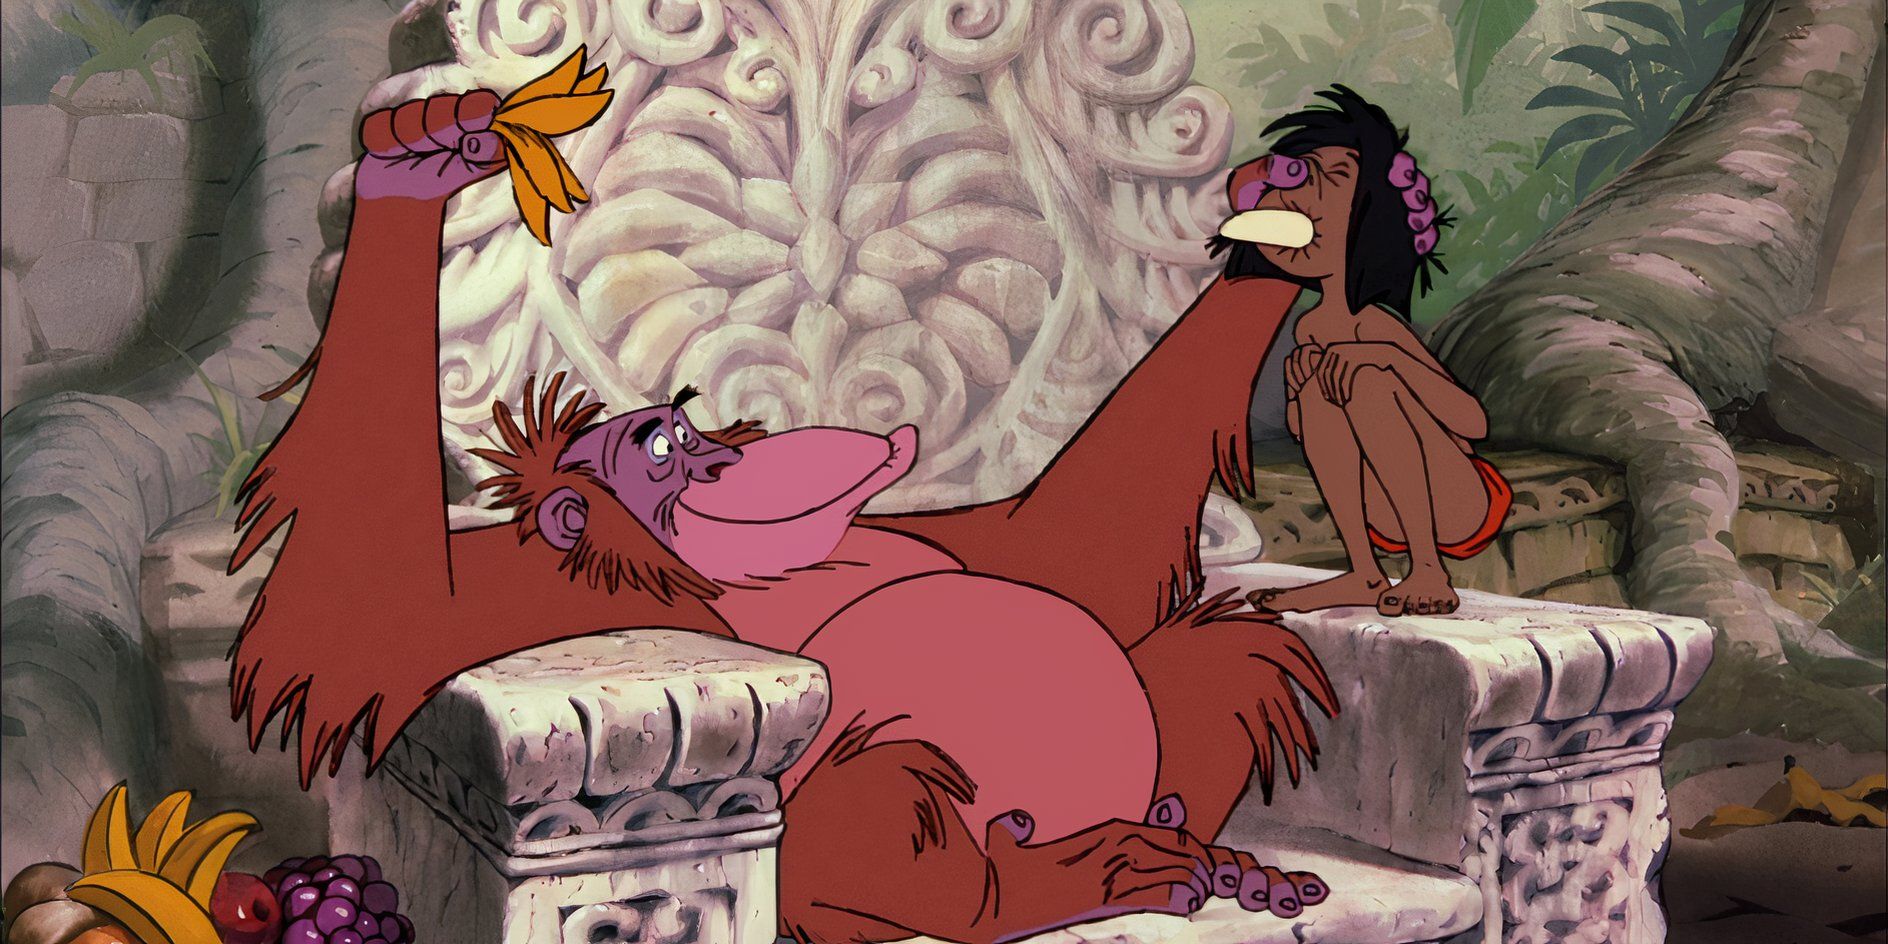 King Louie making Mowgli eat a banana while sitting on his throne in 'The Jungle Book'